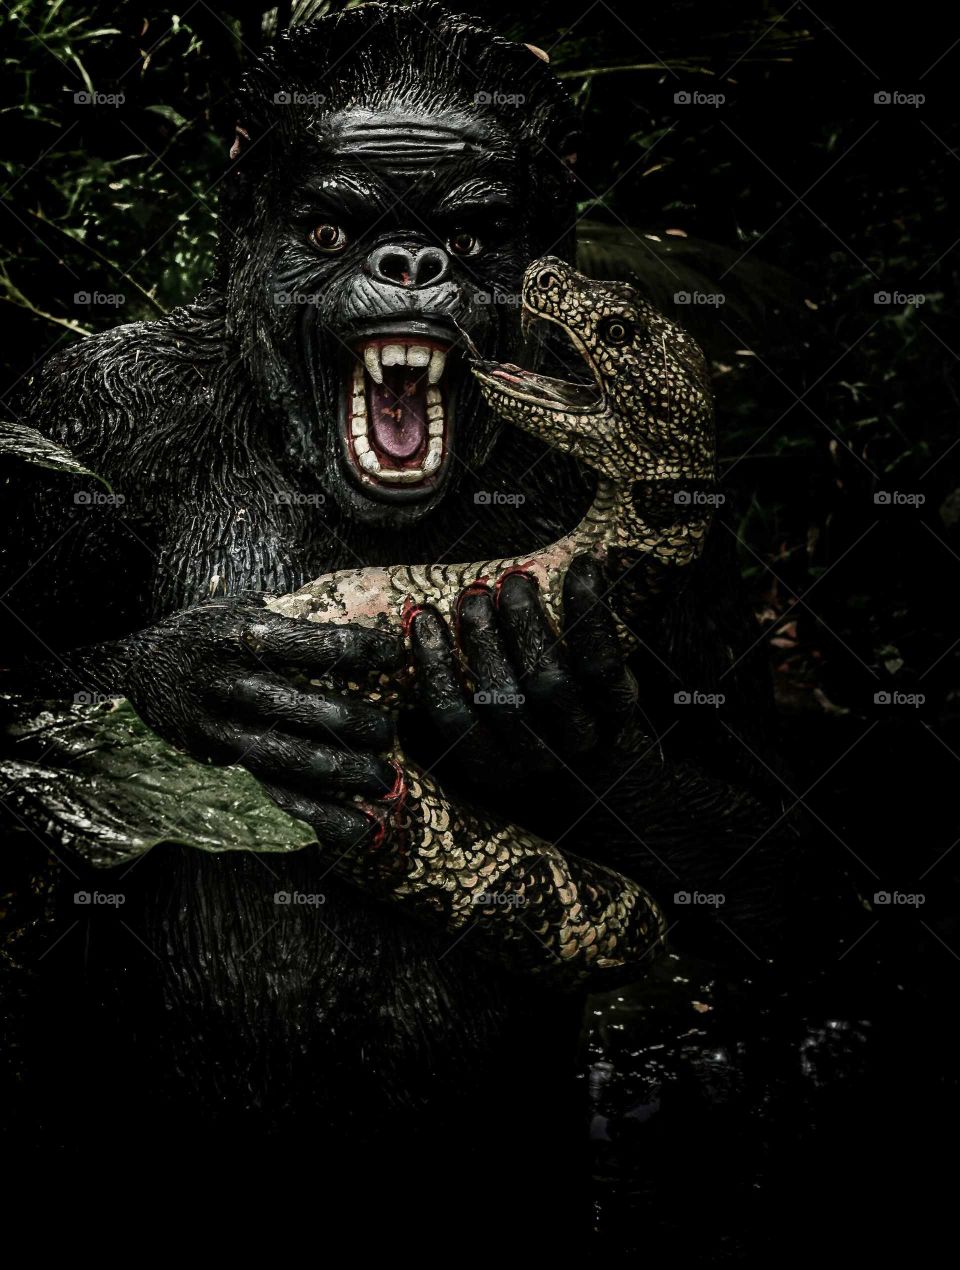 kingkong and anaconda fight depicted. awesome statute converted into fine art photography